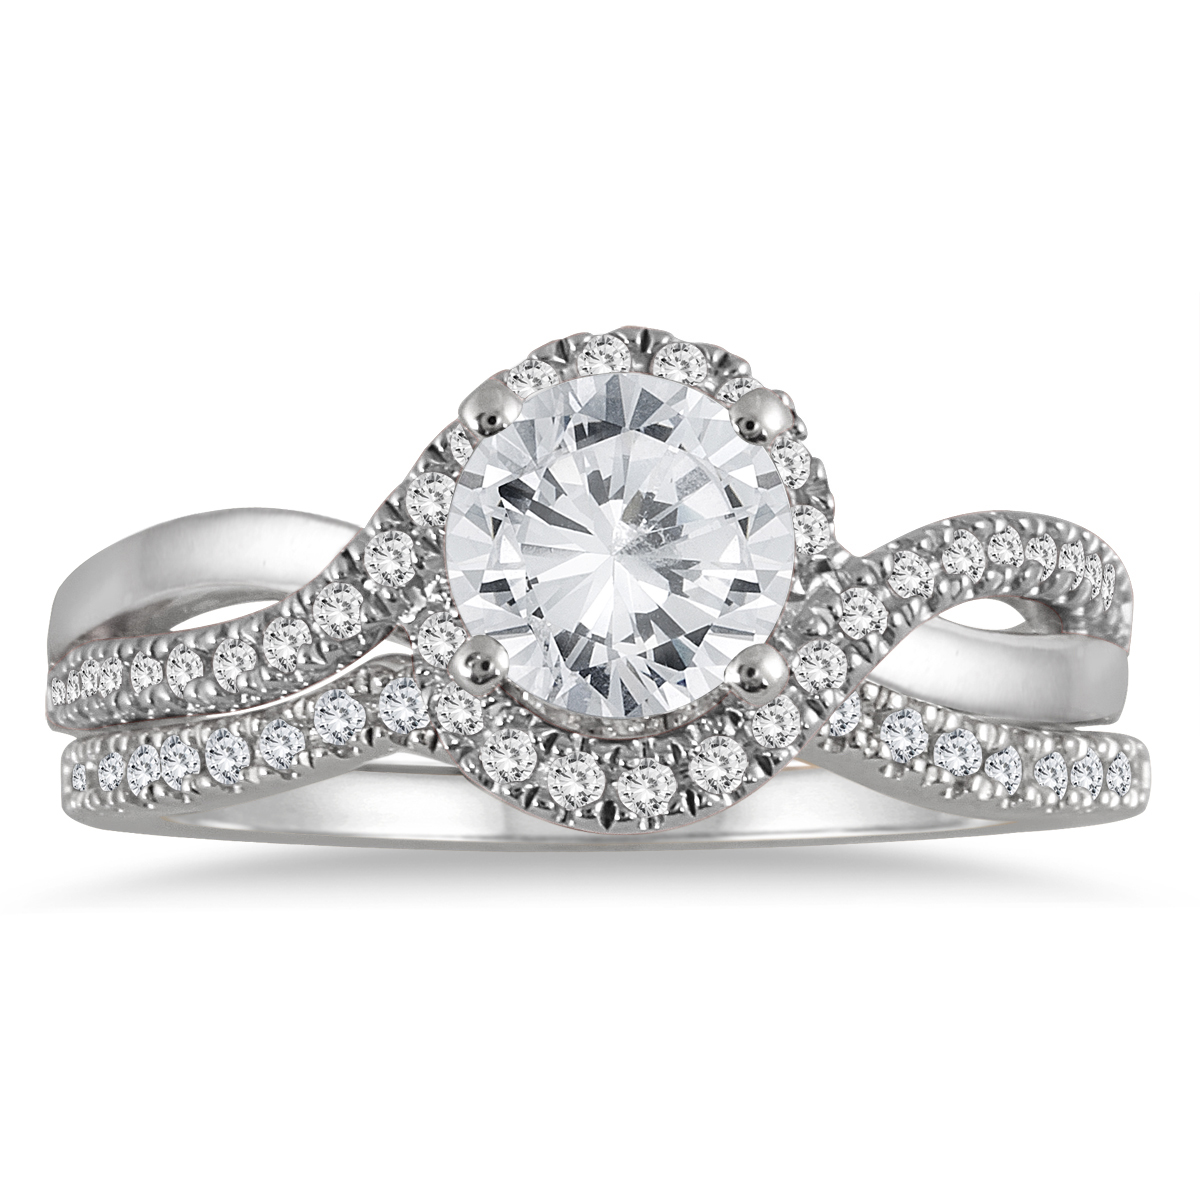 Image of AGS Certified 1 1/4 Carat TW Diamond Bridal Set in 14K White Gold (J-K Color I2-I3 Clarity)